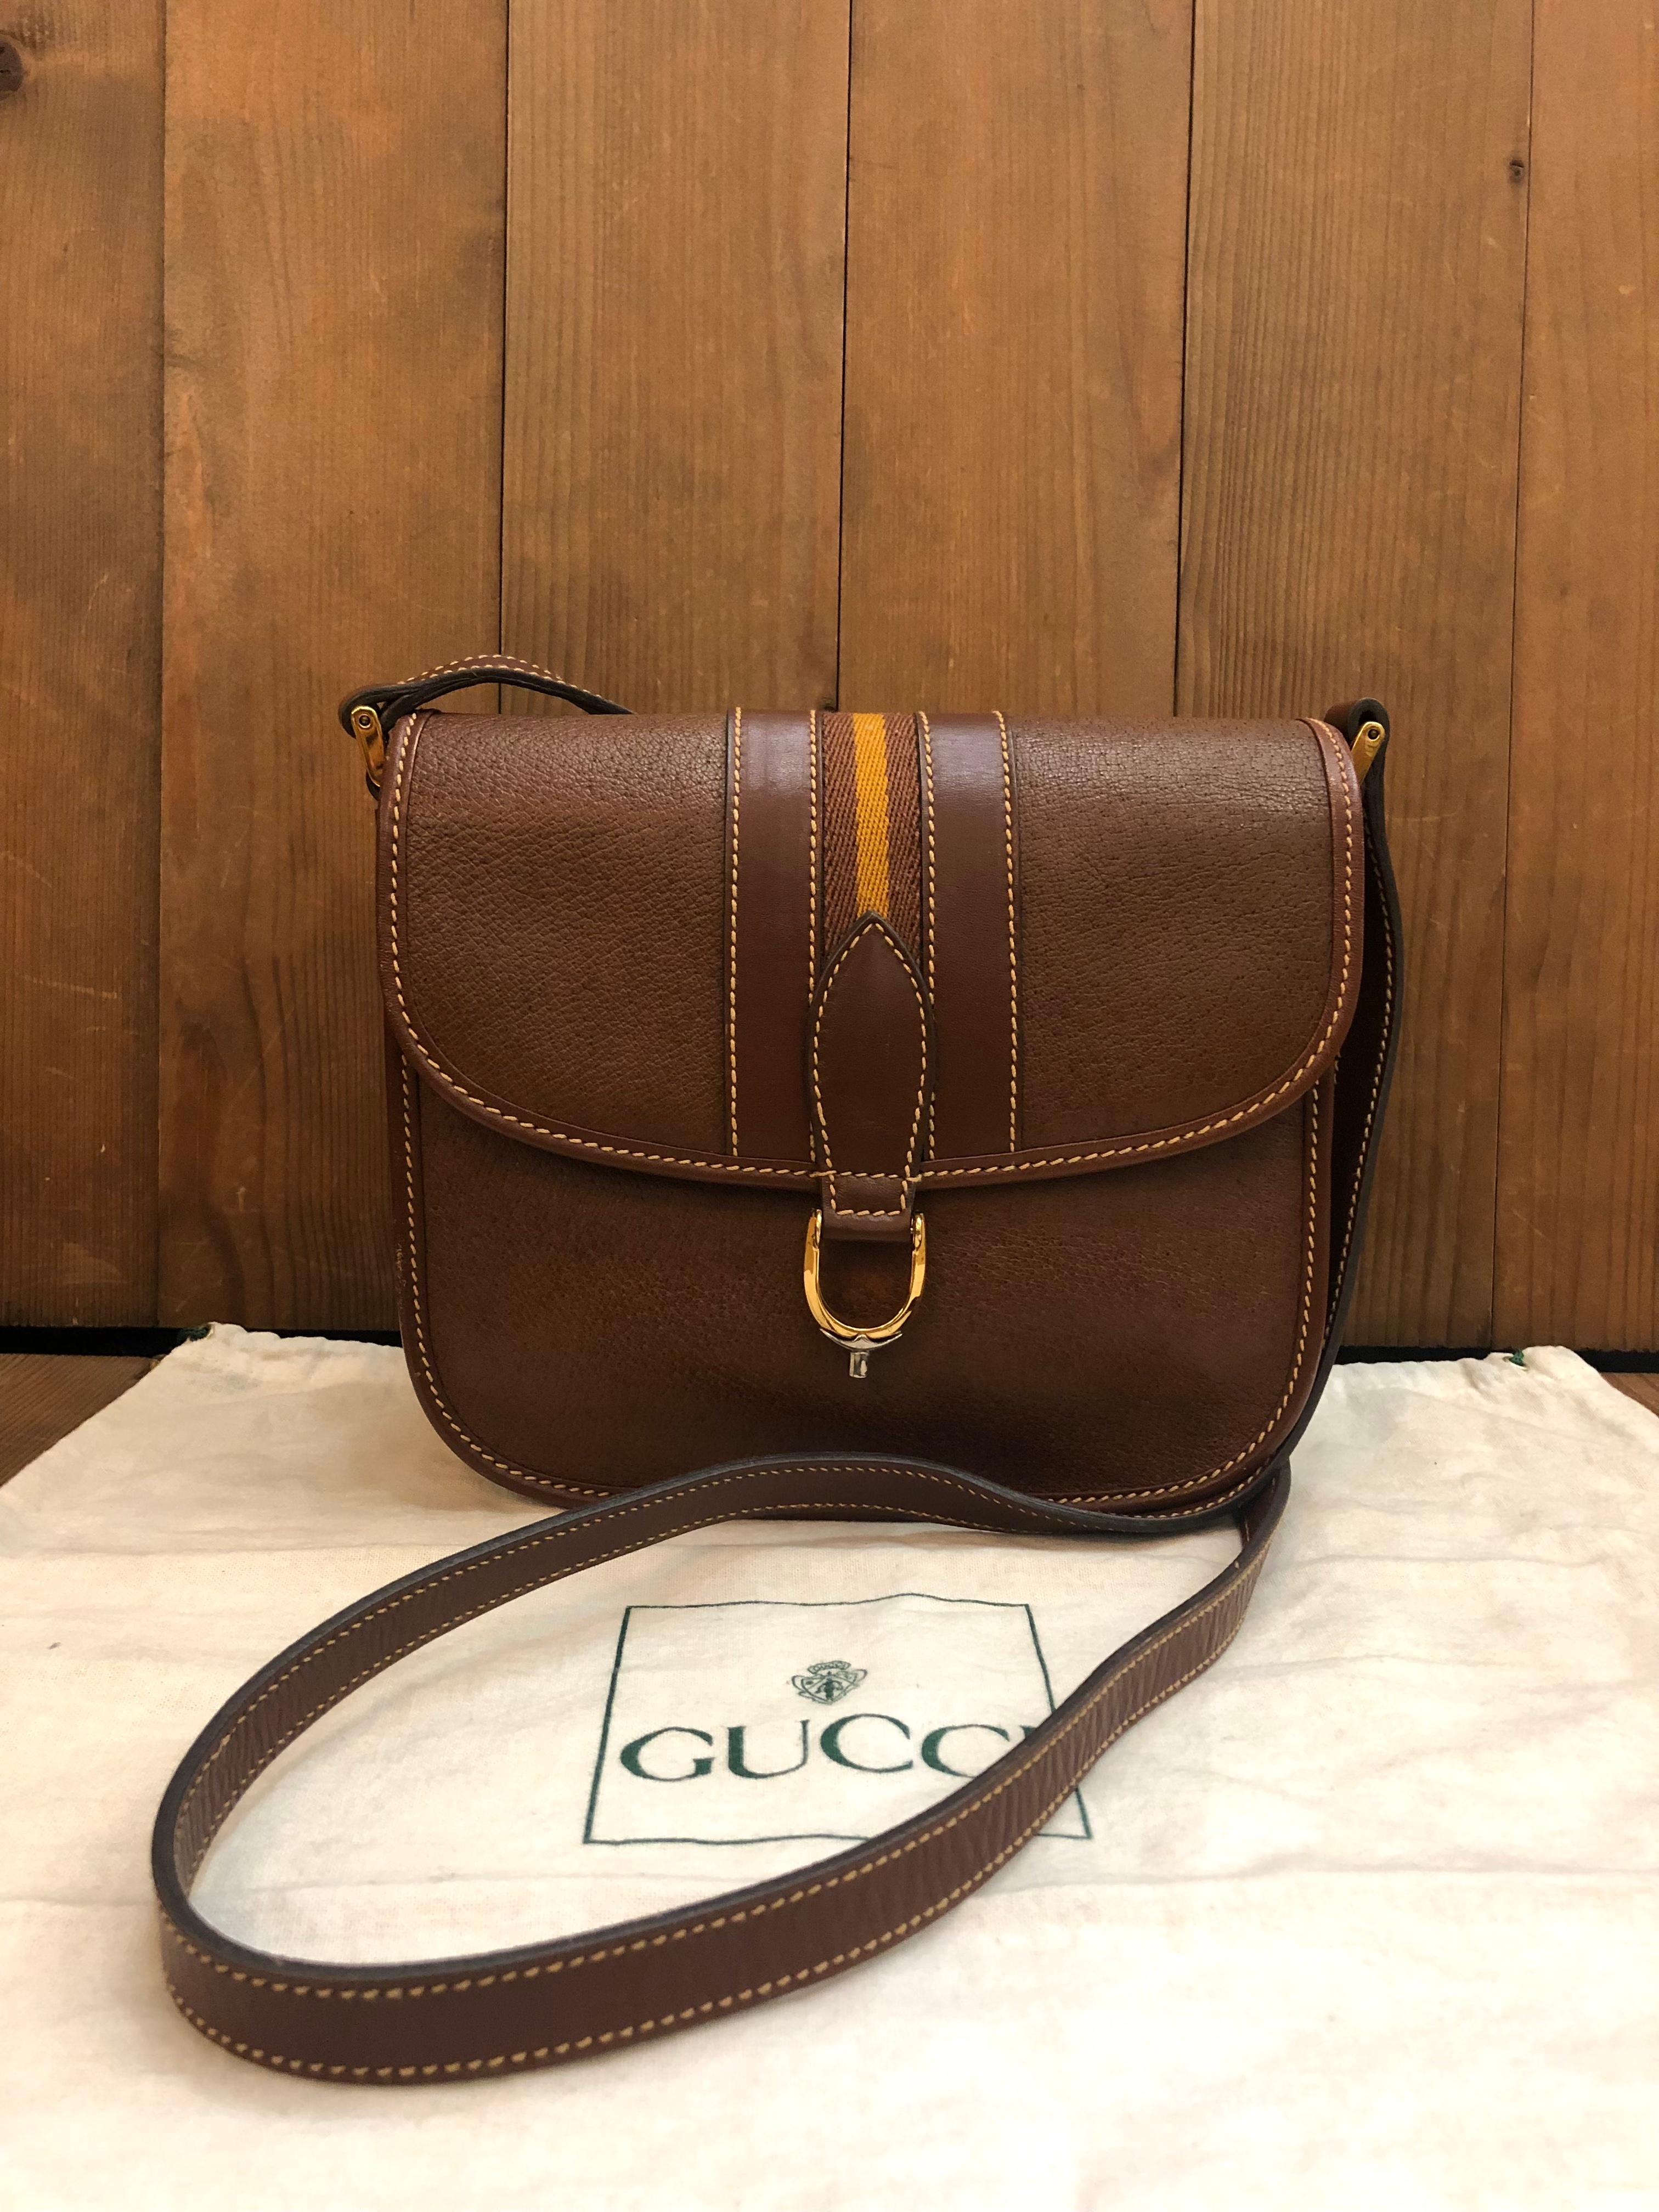 This vintage GUCCI Web equestrian crossbody bag is crafted of pigskin leather in brown featuring gold toned hardware and decorated with a brown/yellow stripe. Front magnetic snap closure opens to a brown nubuck leather interior featuring two open